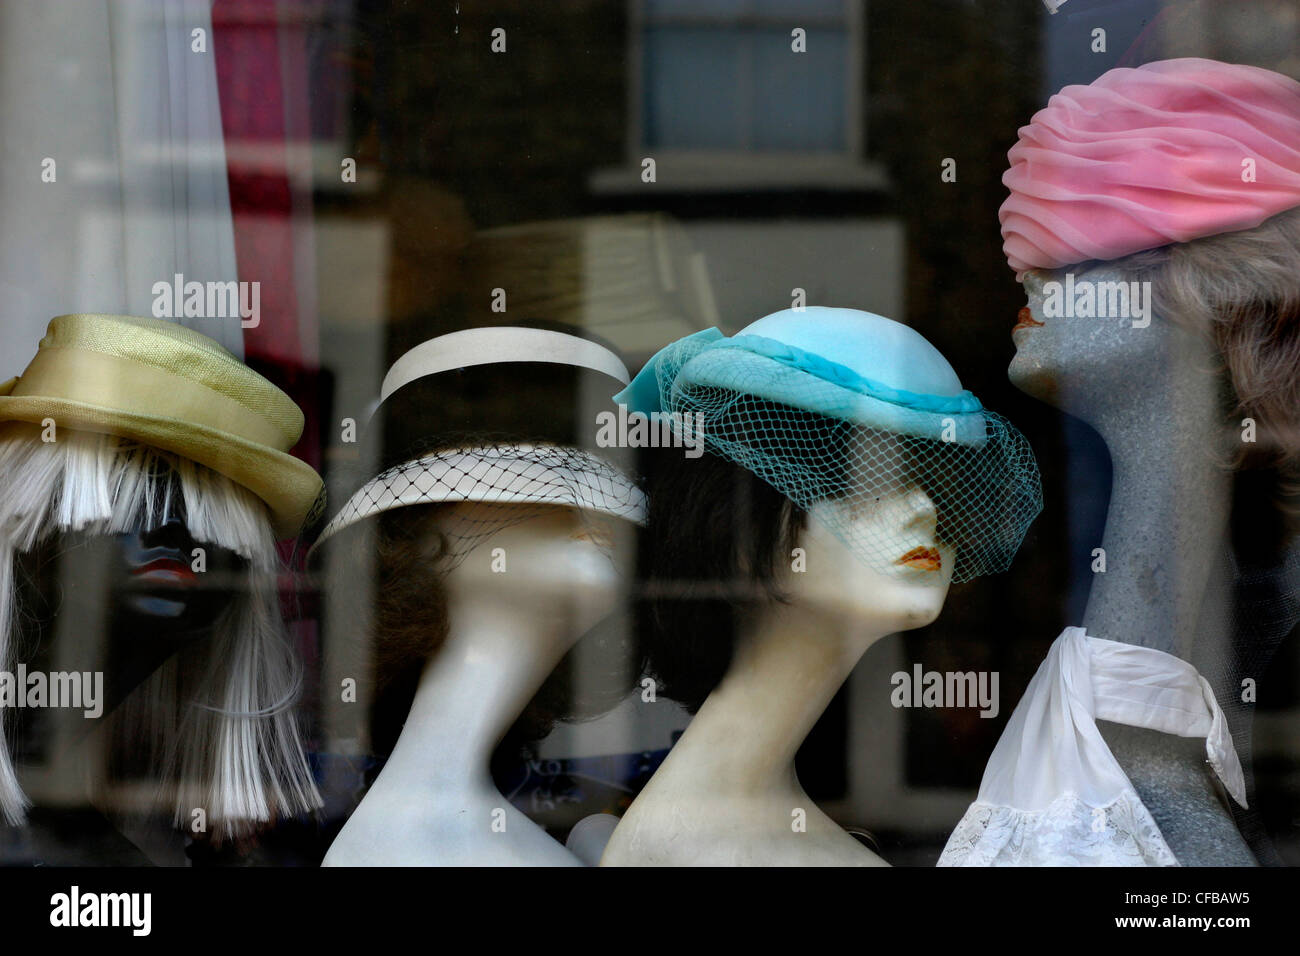 Add Representation To Your Shop Window With Wholesale cap mannequin head 